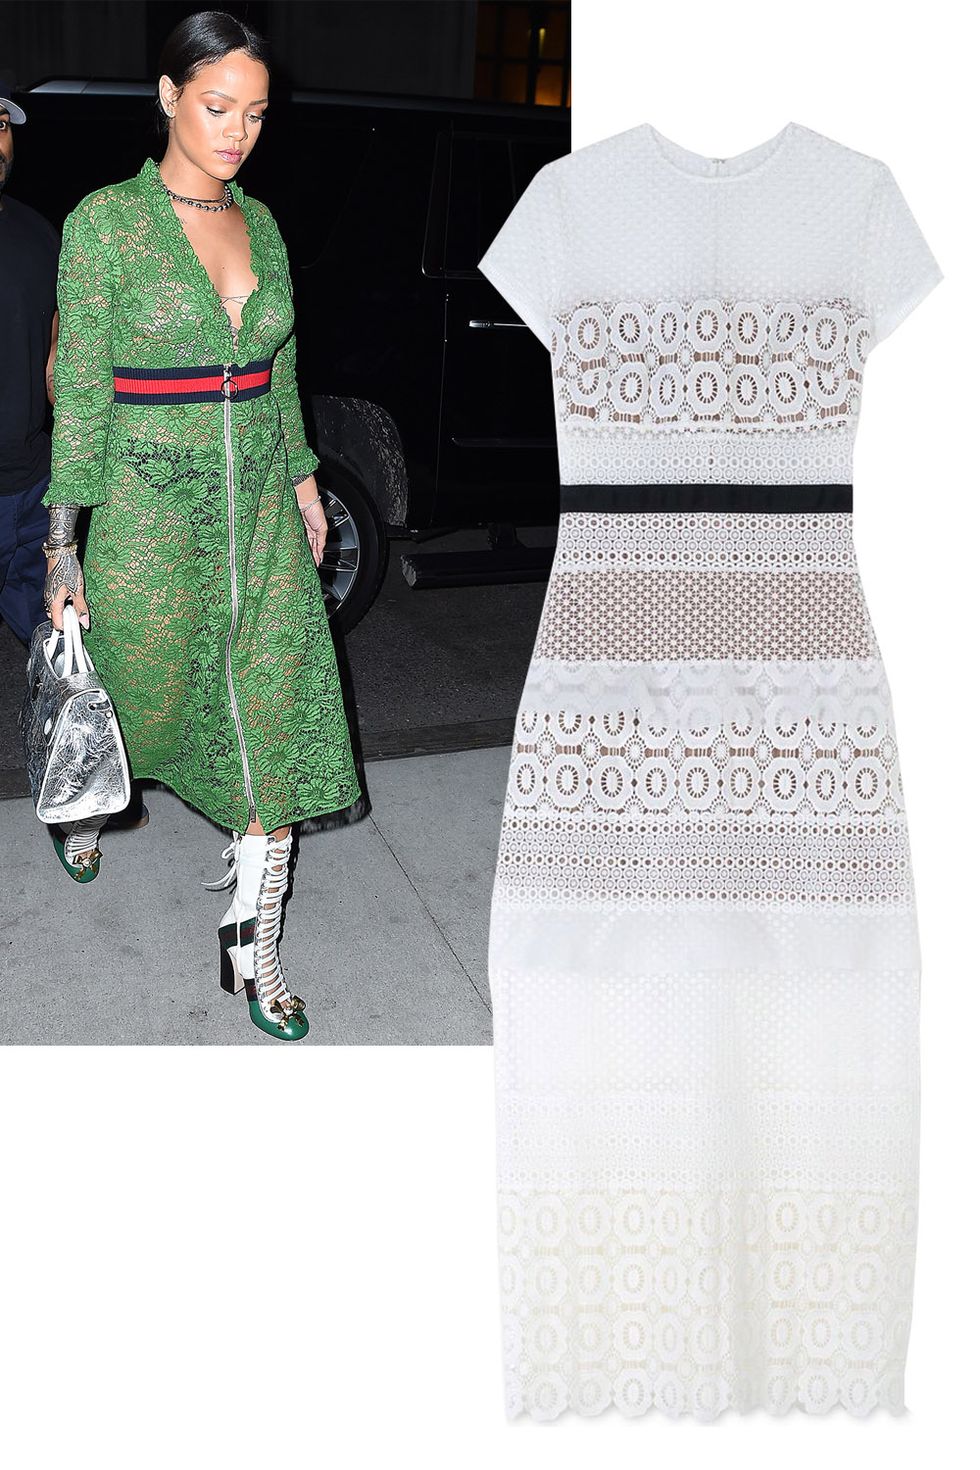 <p> Dare to bare a little skin in the chicest way possible: via a sheer lace look. Rihanna did it in Gucci, and this is our high-street pick. </p><p><em>Self-Portrait dress, $250 (sale), <a href="https://shop.harpersbazaar.com/designers/s/self-portrait/white-short-sleeve-lace-dress-7694.html" target="_blank">shopBAZAAR.com</a>. </em></p>